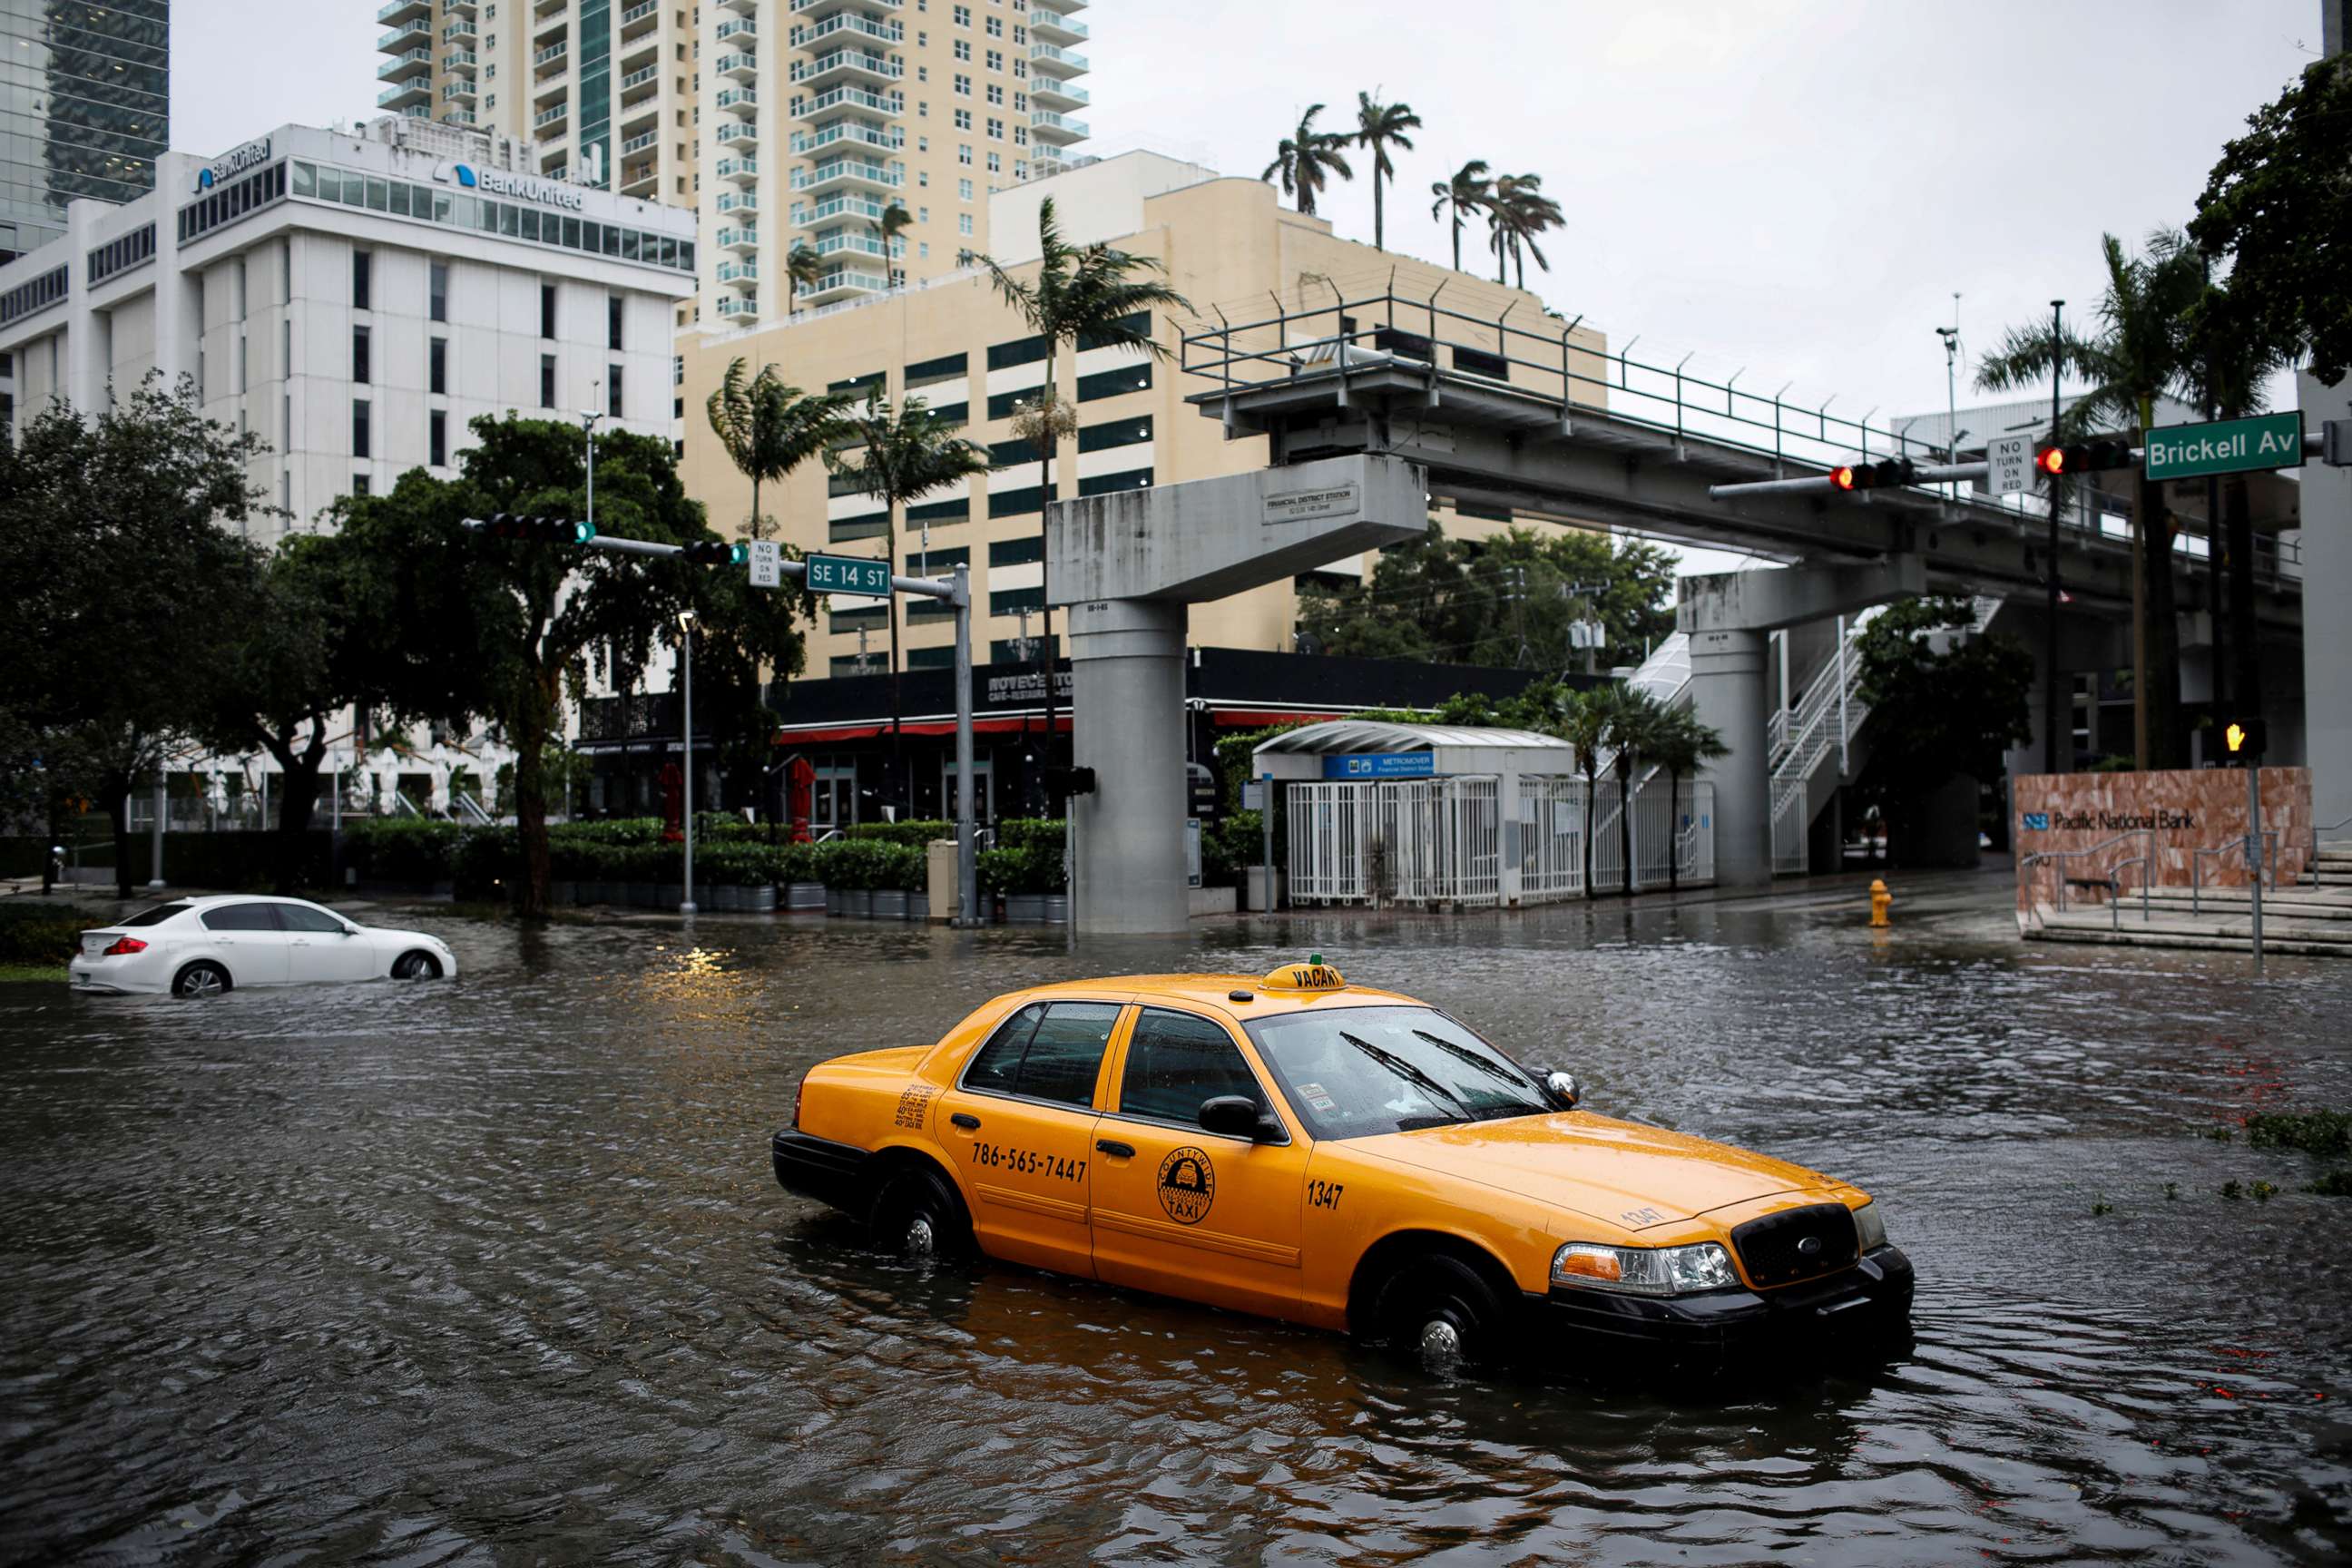 PHOTO: A damaged taxi is seen in floodwaters caused by Storm Eta in a street at the Brickell neighborhood in Miami, Nov. 9, 2020.